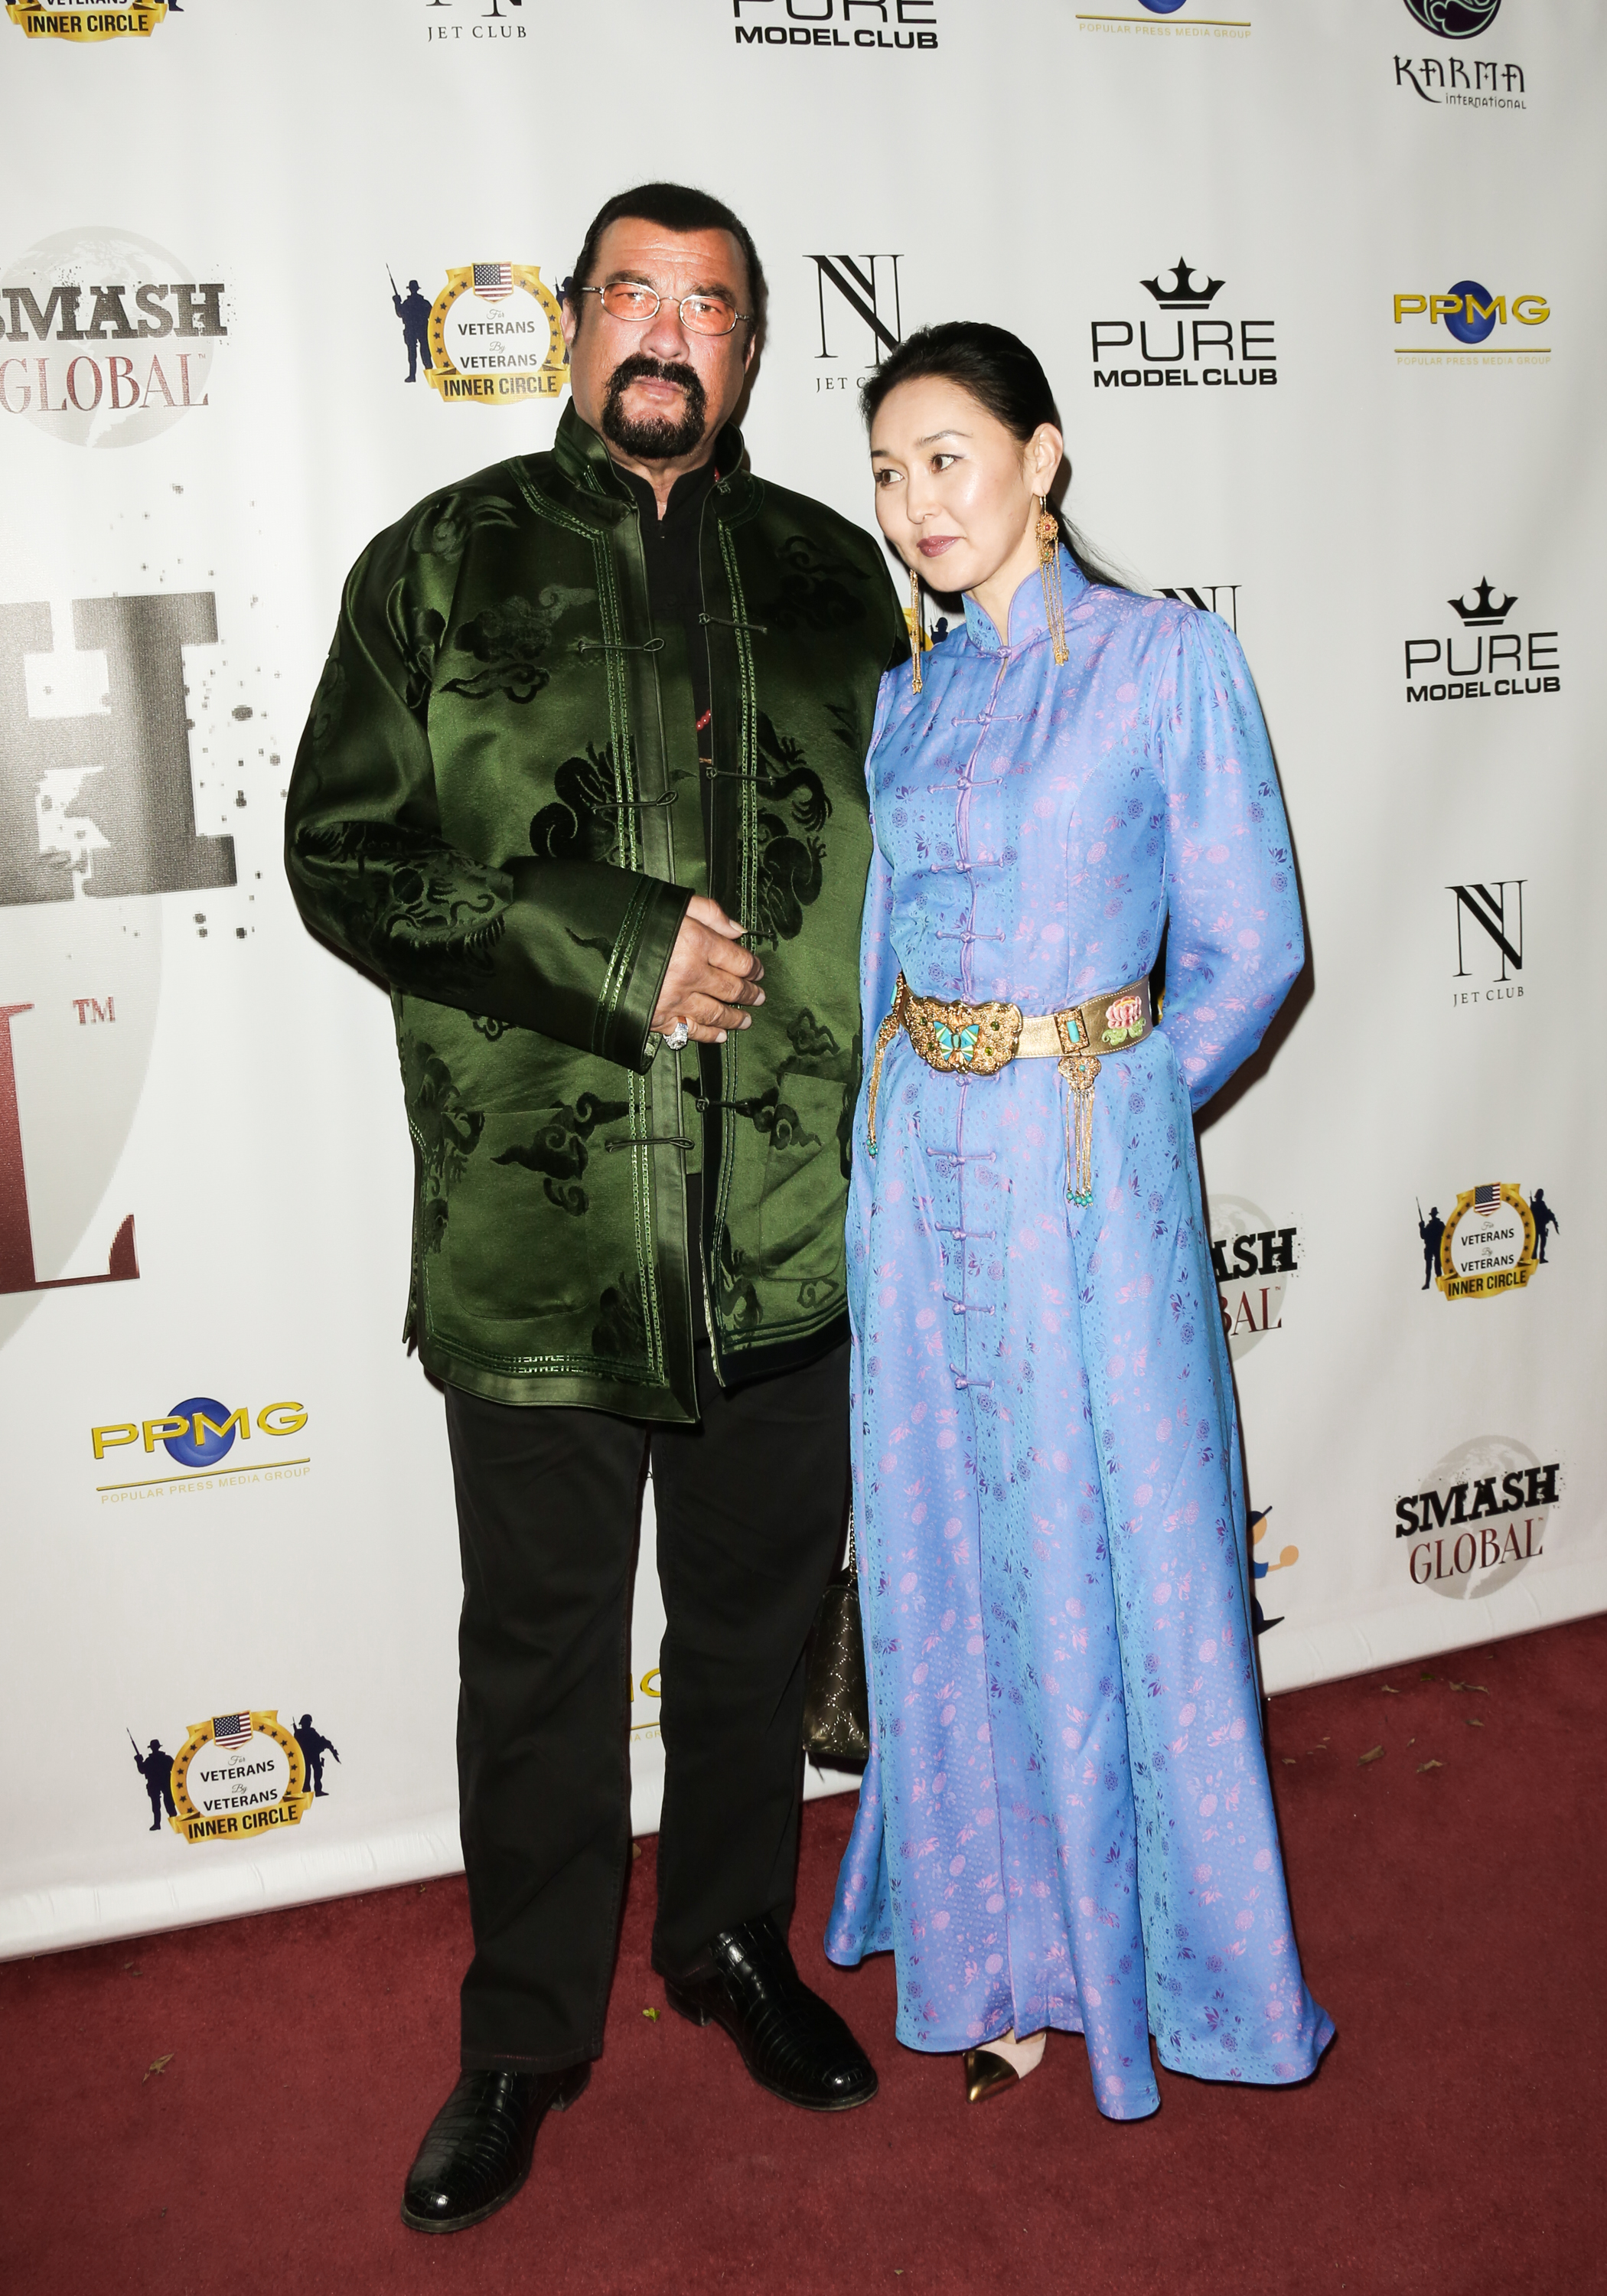 Steven Seagal and Erdenetuya Seagal attend the SMASH Global V pre-Oscar fight at Taglyan Complex on February 23, 2017, in Los Angeles, California. | Source: Getty Images